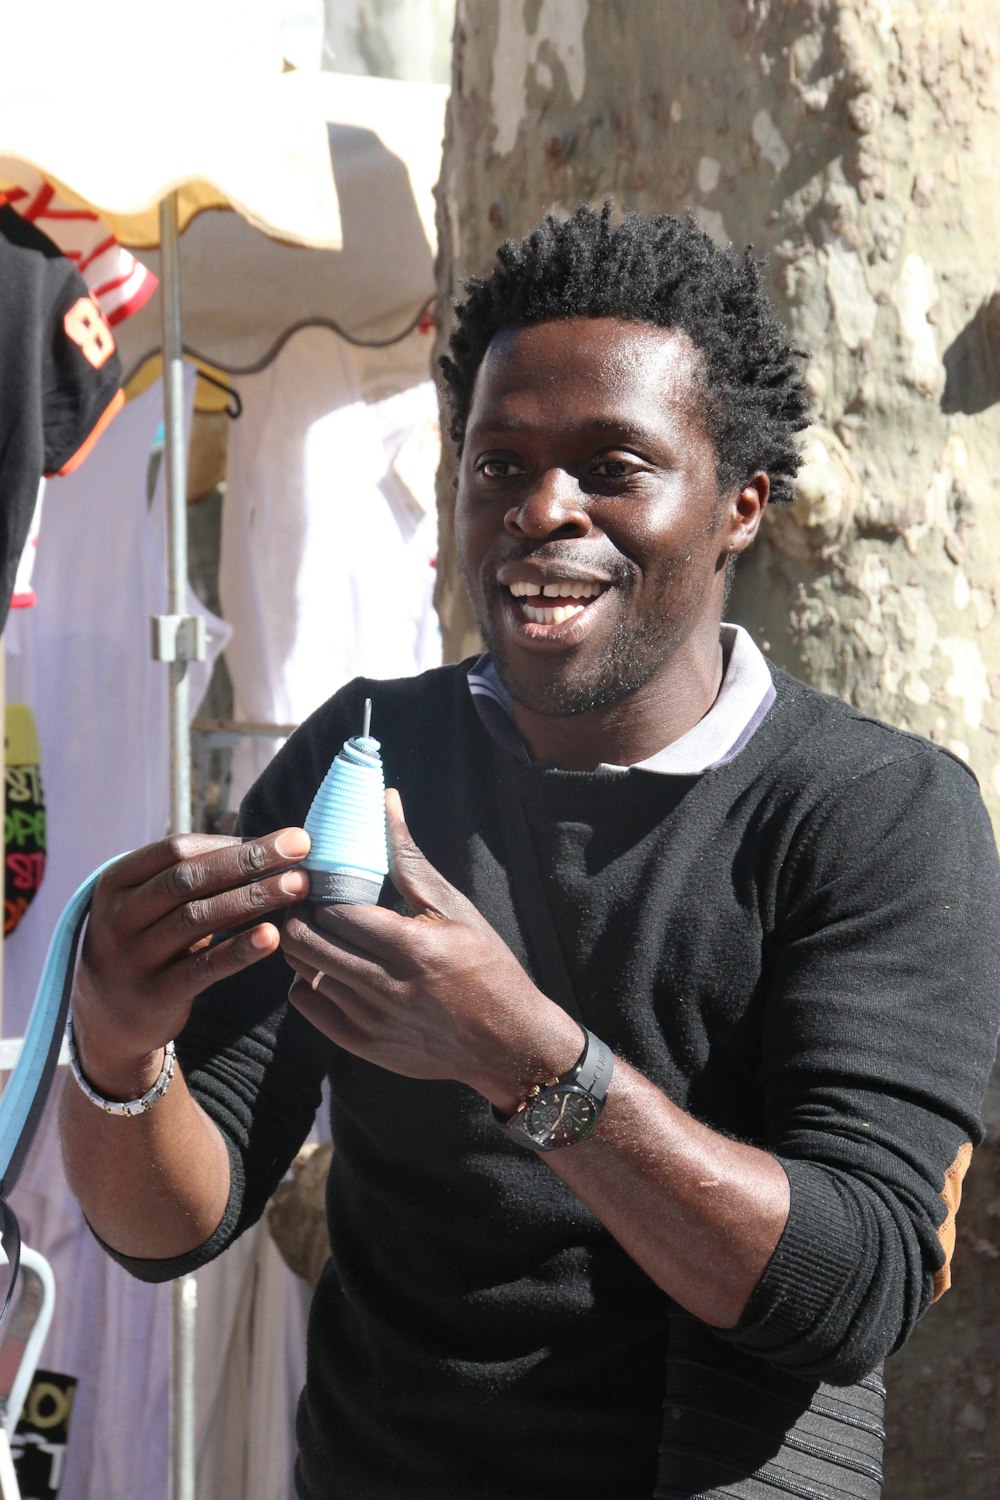 a man is holding a baby bottle and smiling